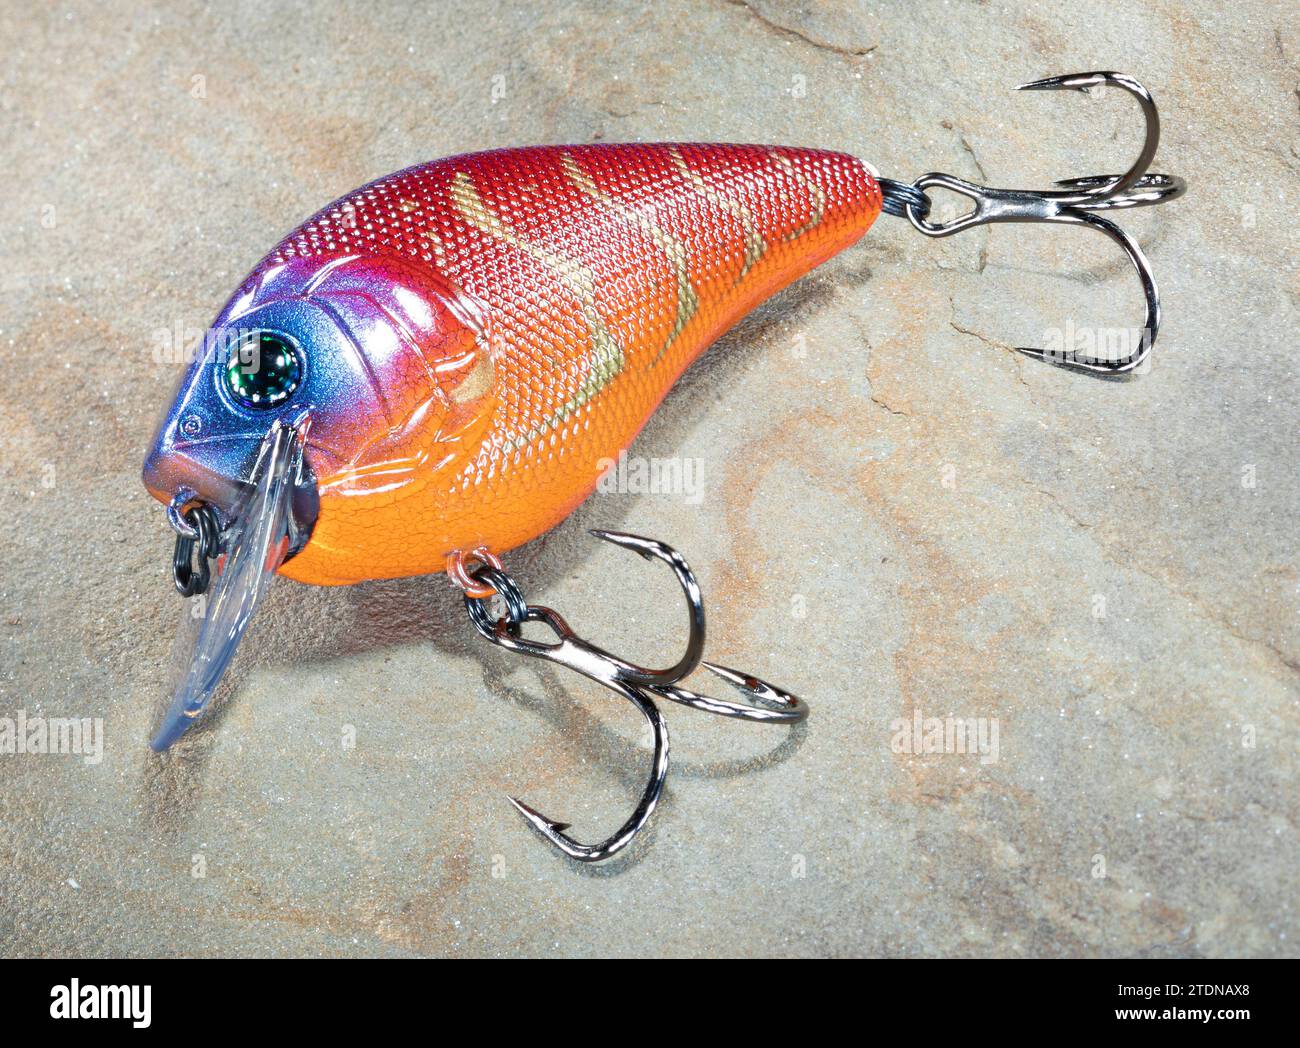 Polymer fishing lure with two treble hooks that is purple on top and has a  shadow behind Stock Photo - Alamy